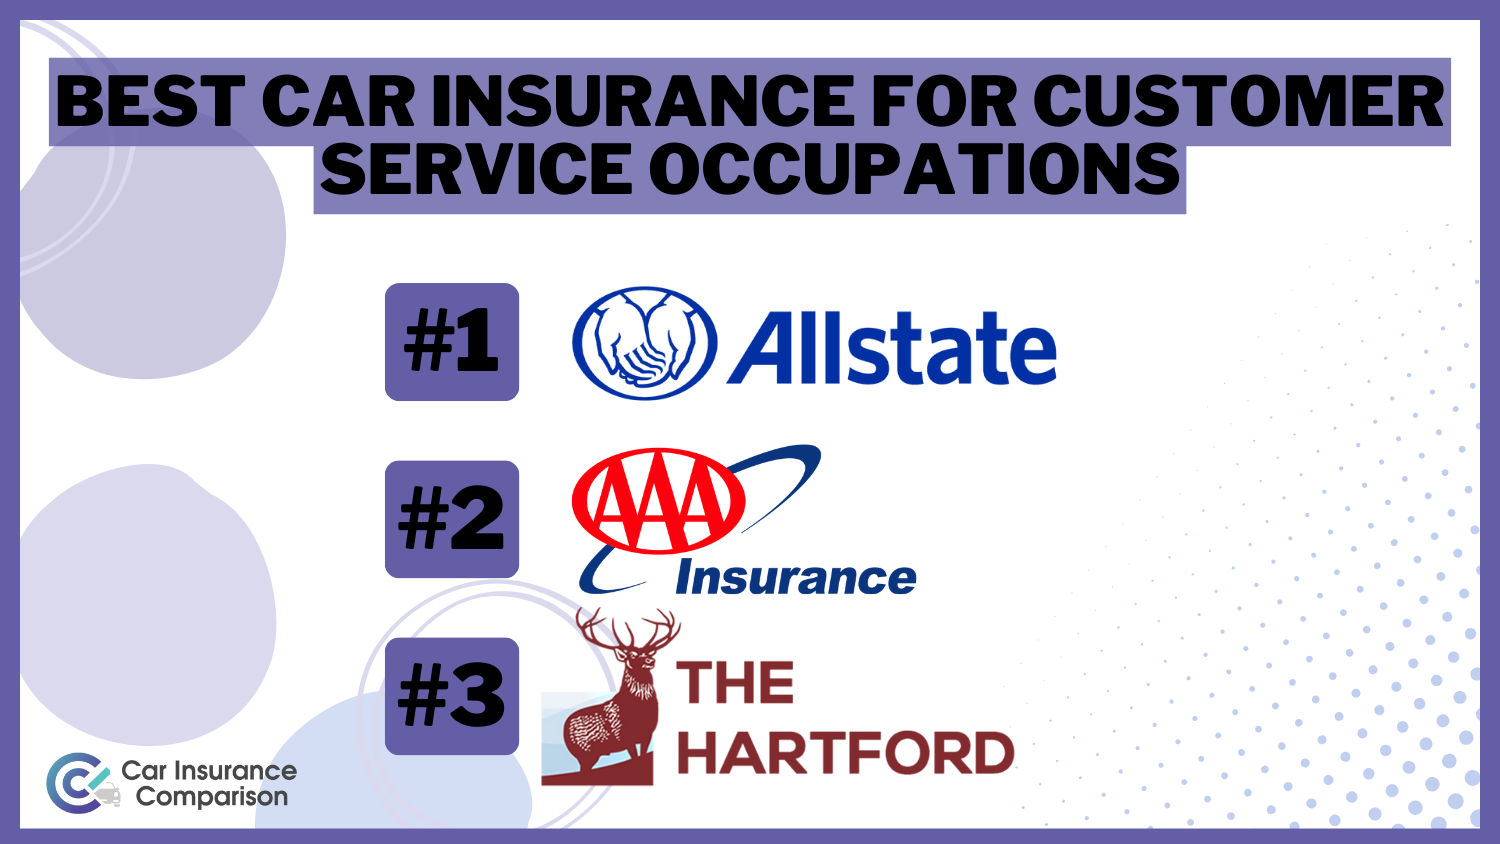 Best Car Insurance For Customer Service Occupations: Allstate, AAA, The Hartford